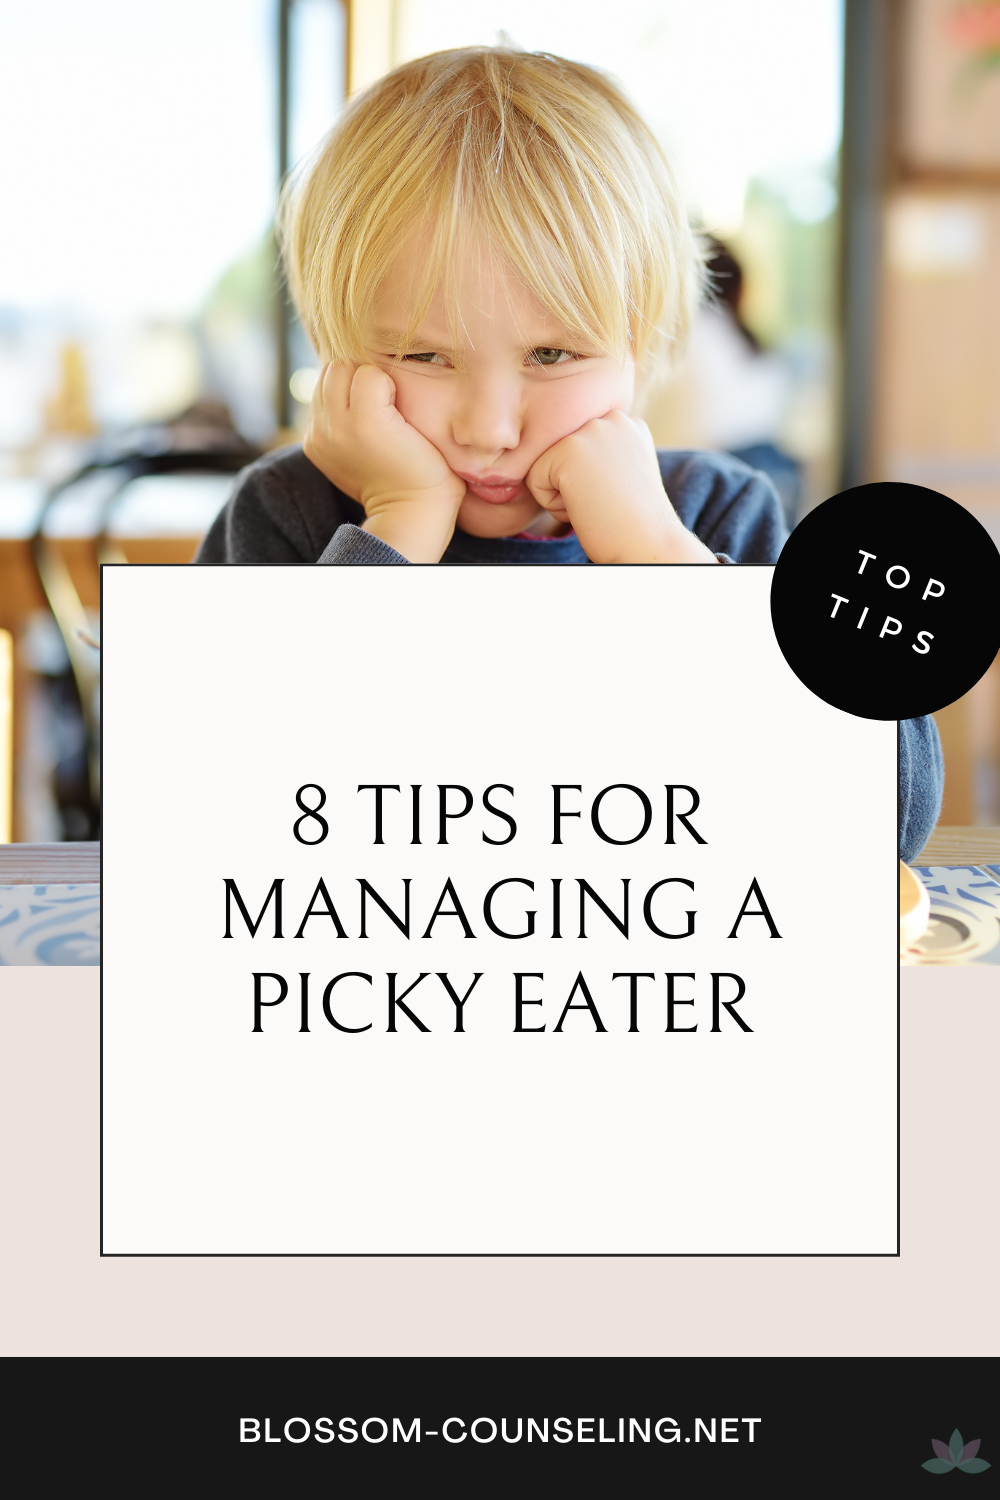 8 Tips for Managing a Picky Eater